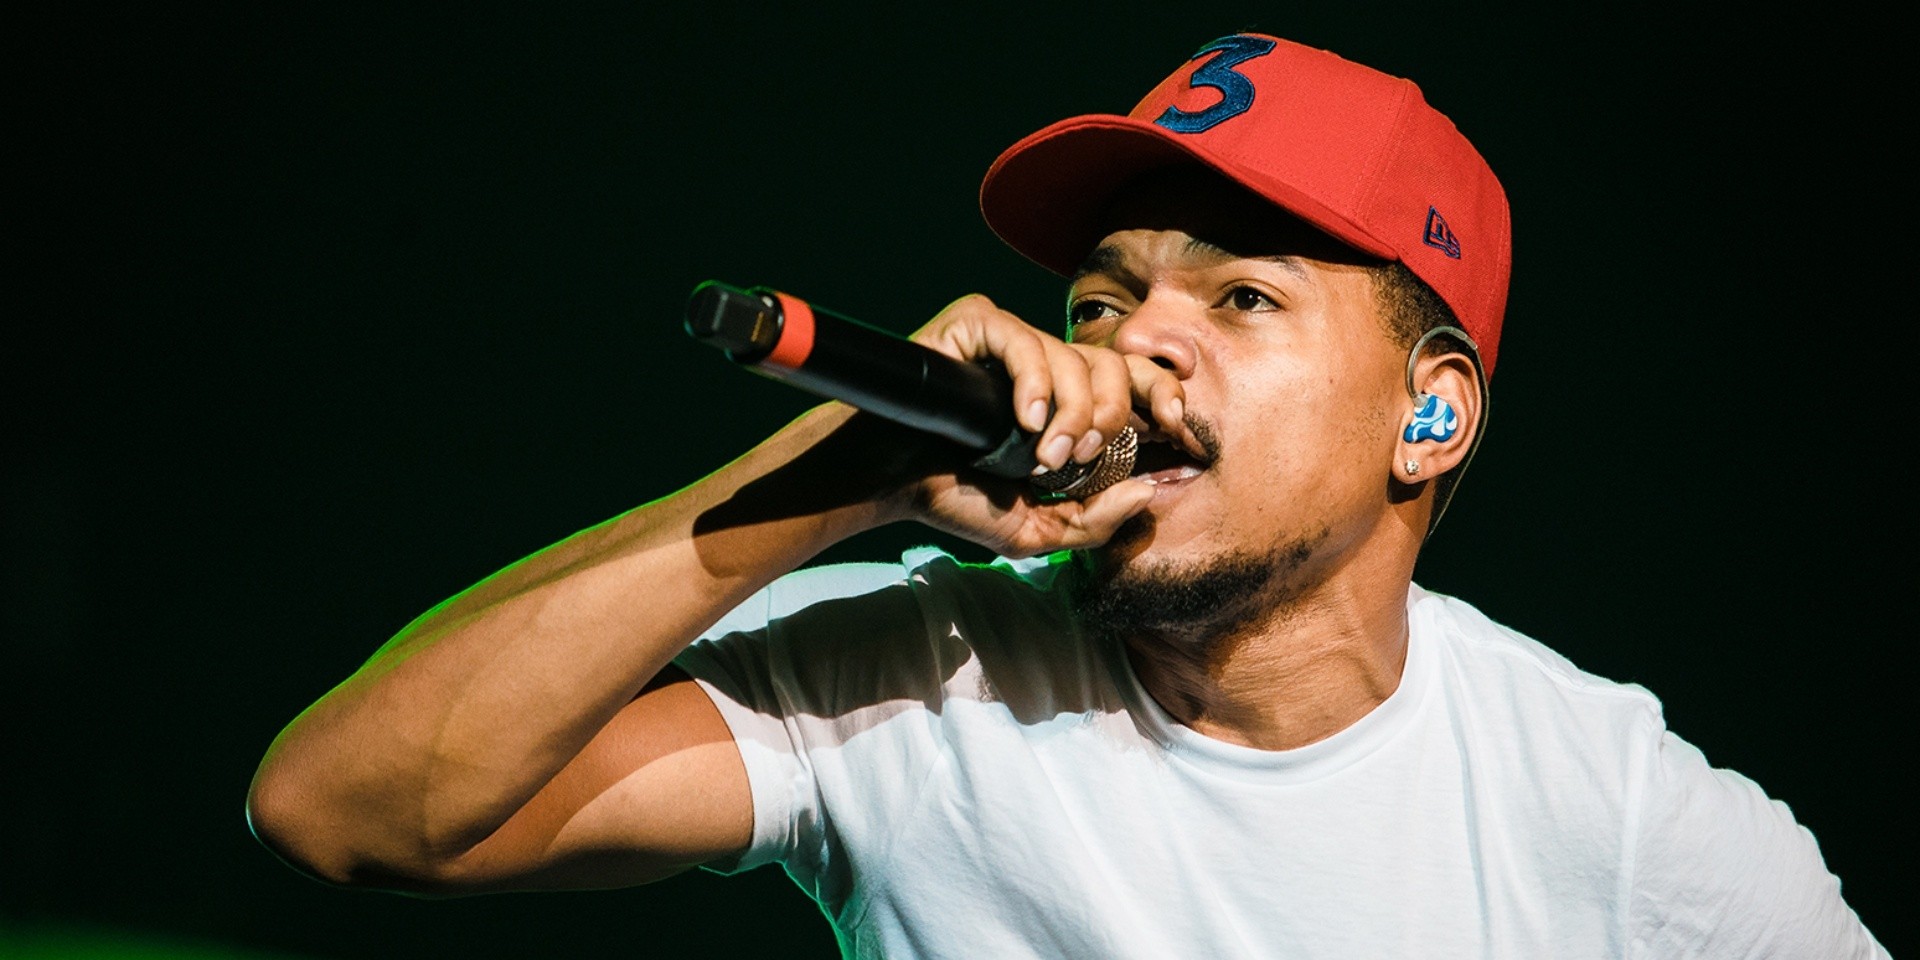 Chance The Rapper will release a new album in July